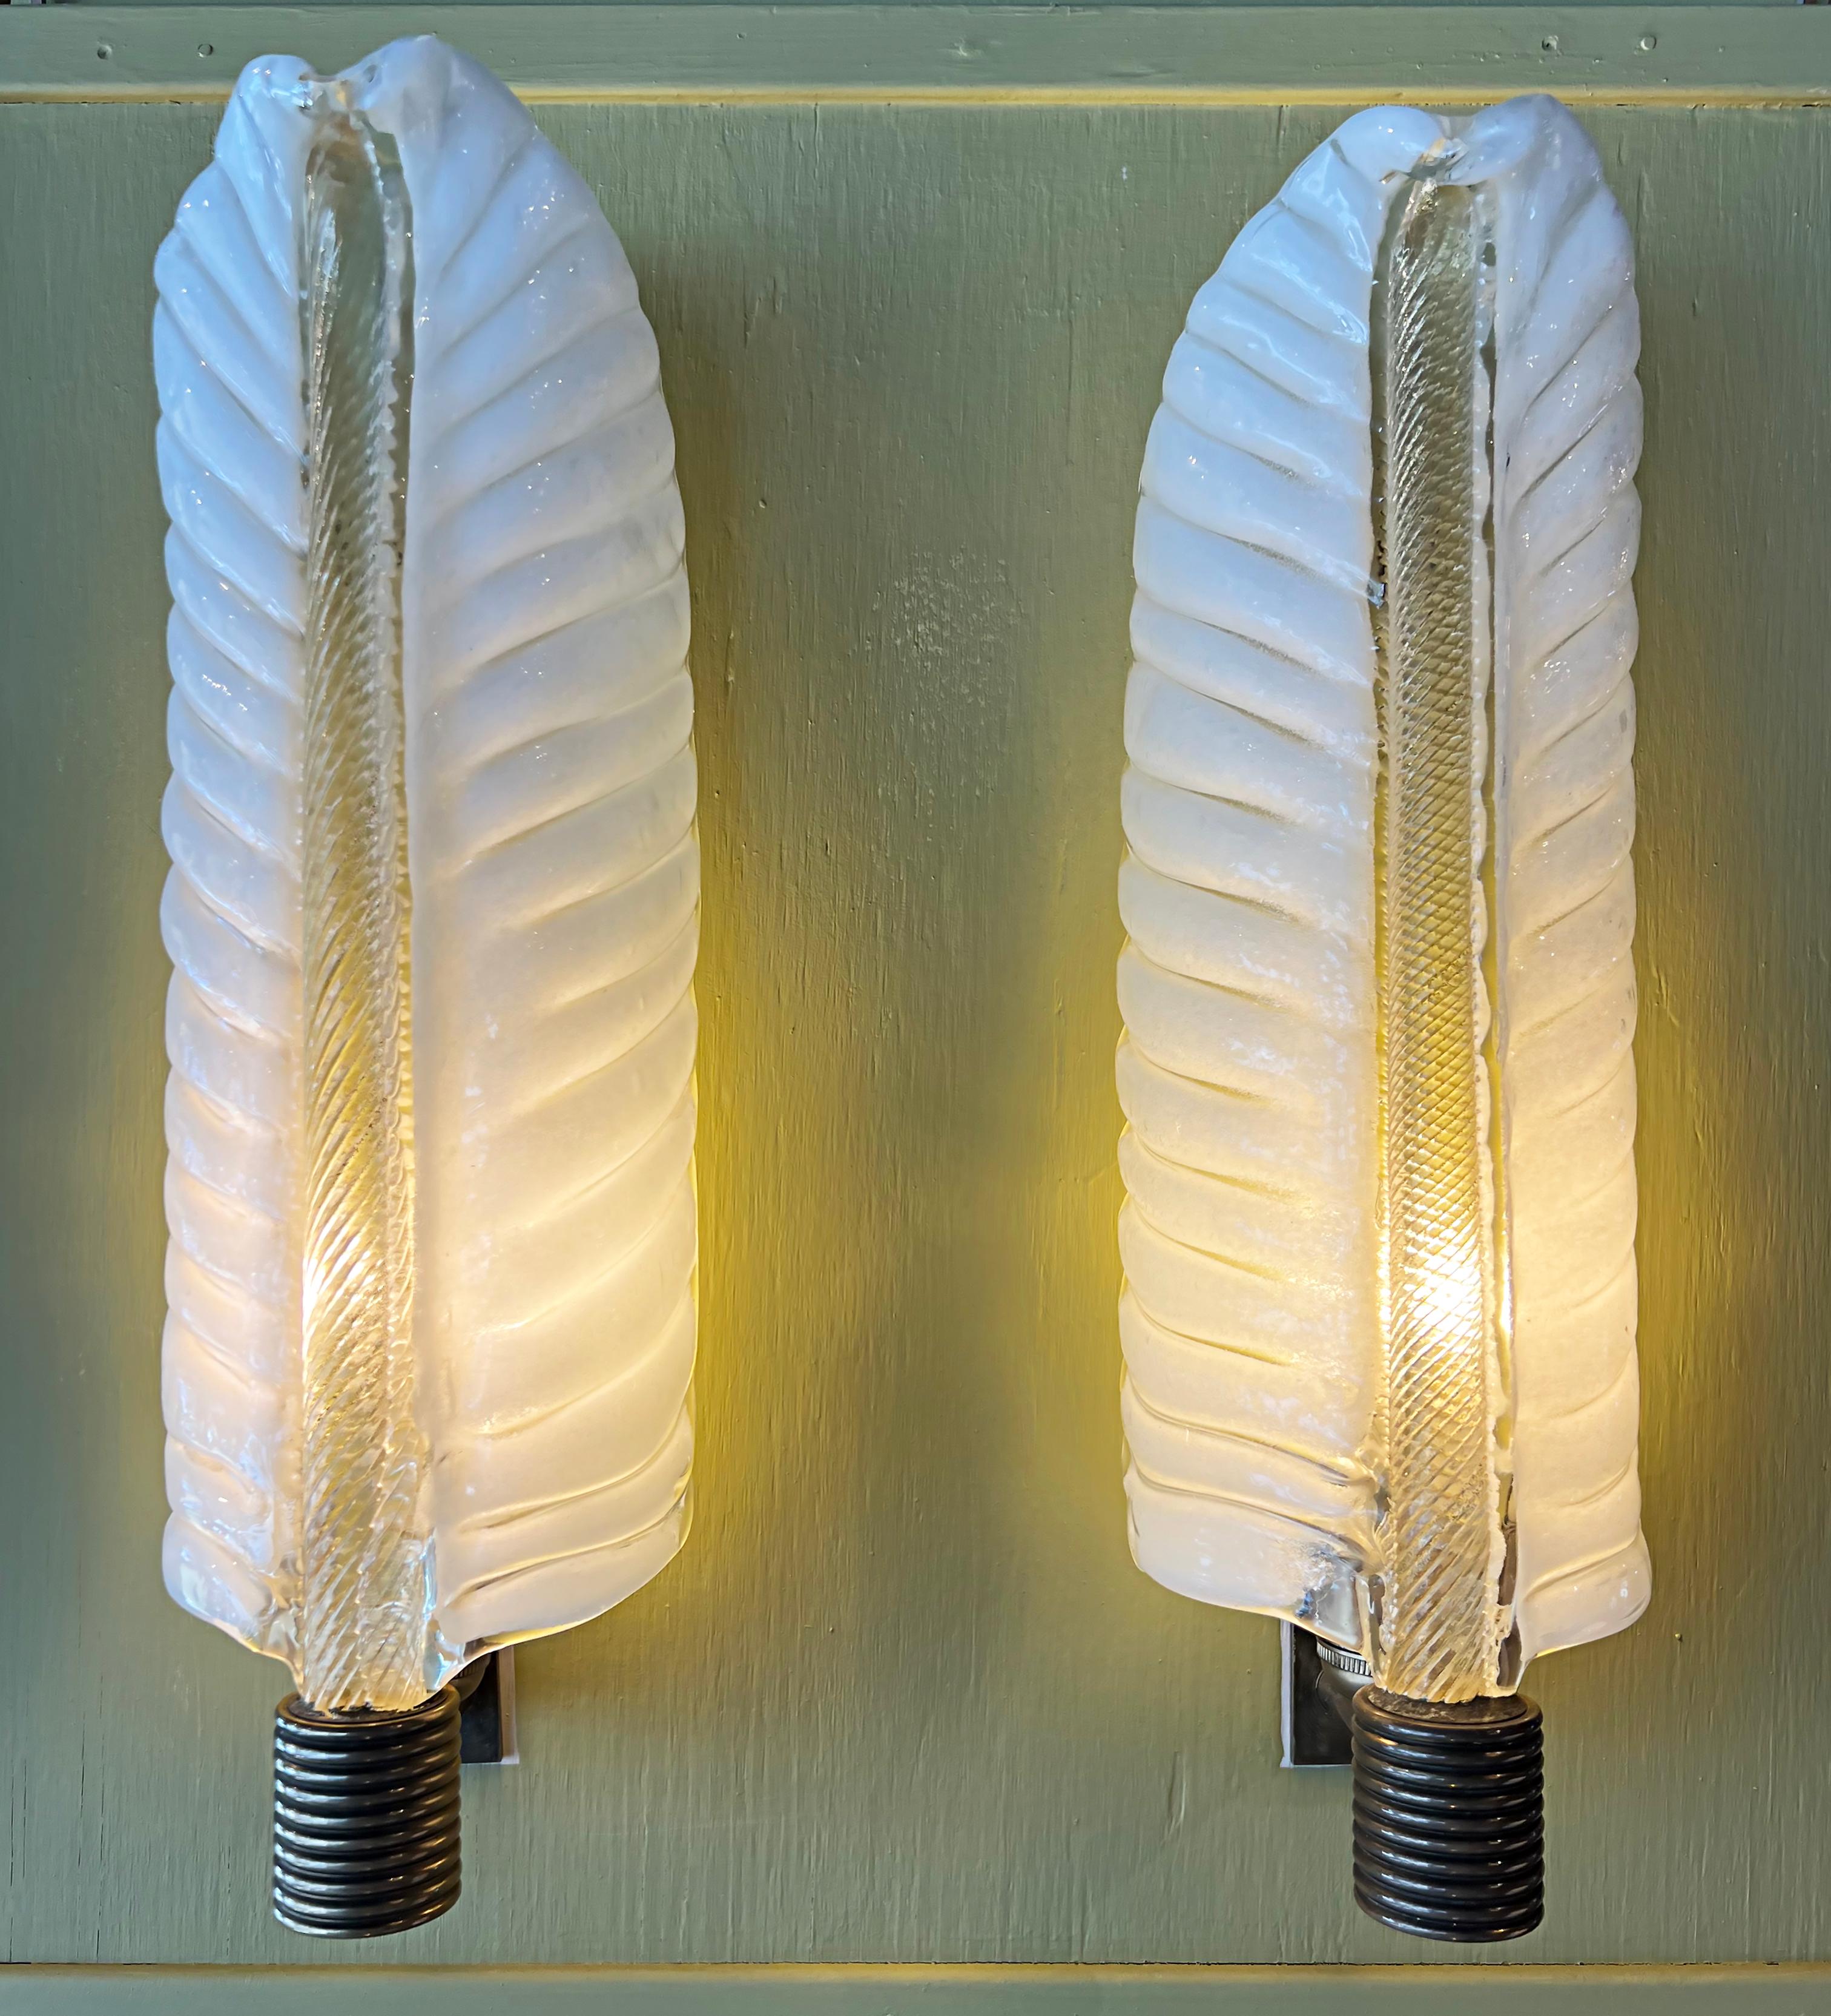 Barovier & Toso Murano blown glass wall sconces Acanthus leaf pair

Offered for sale is a pair of Italian 1940s Art Deco blown glass sconces from Barovier and Toso. These white and clear stylized acanthus leaf glass sconces have gold-infused stems